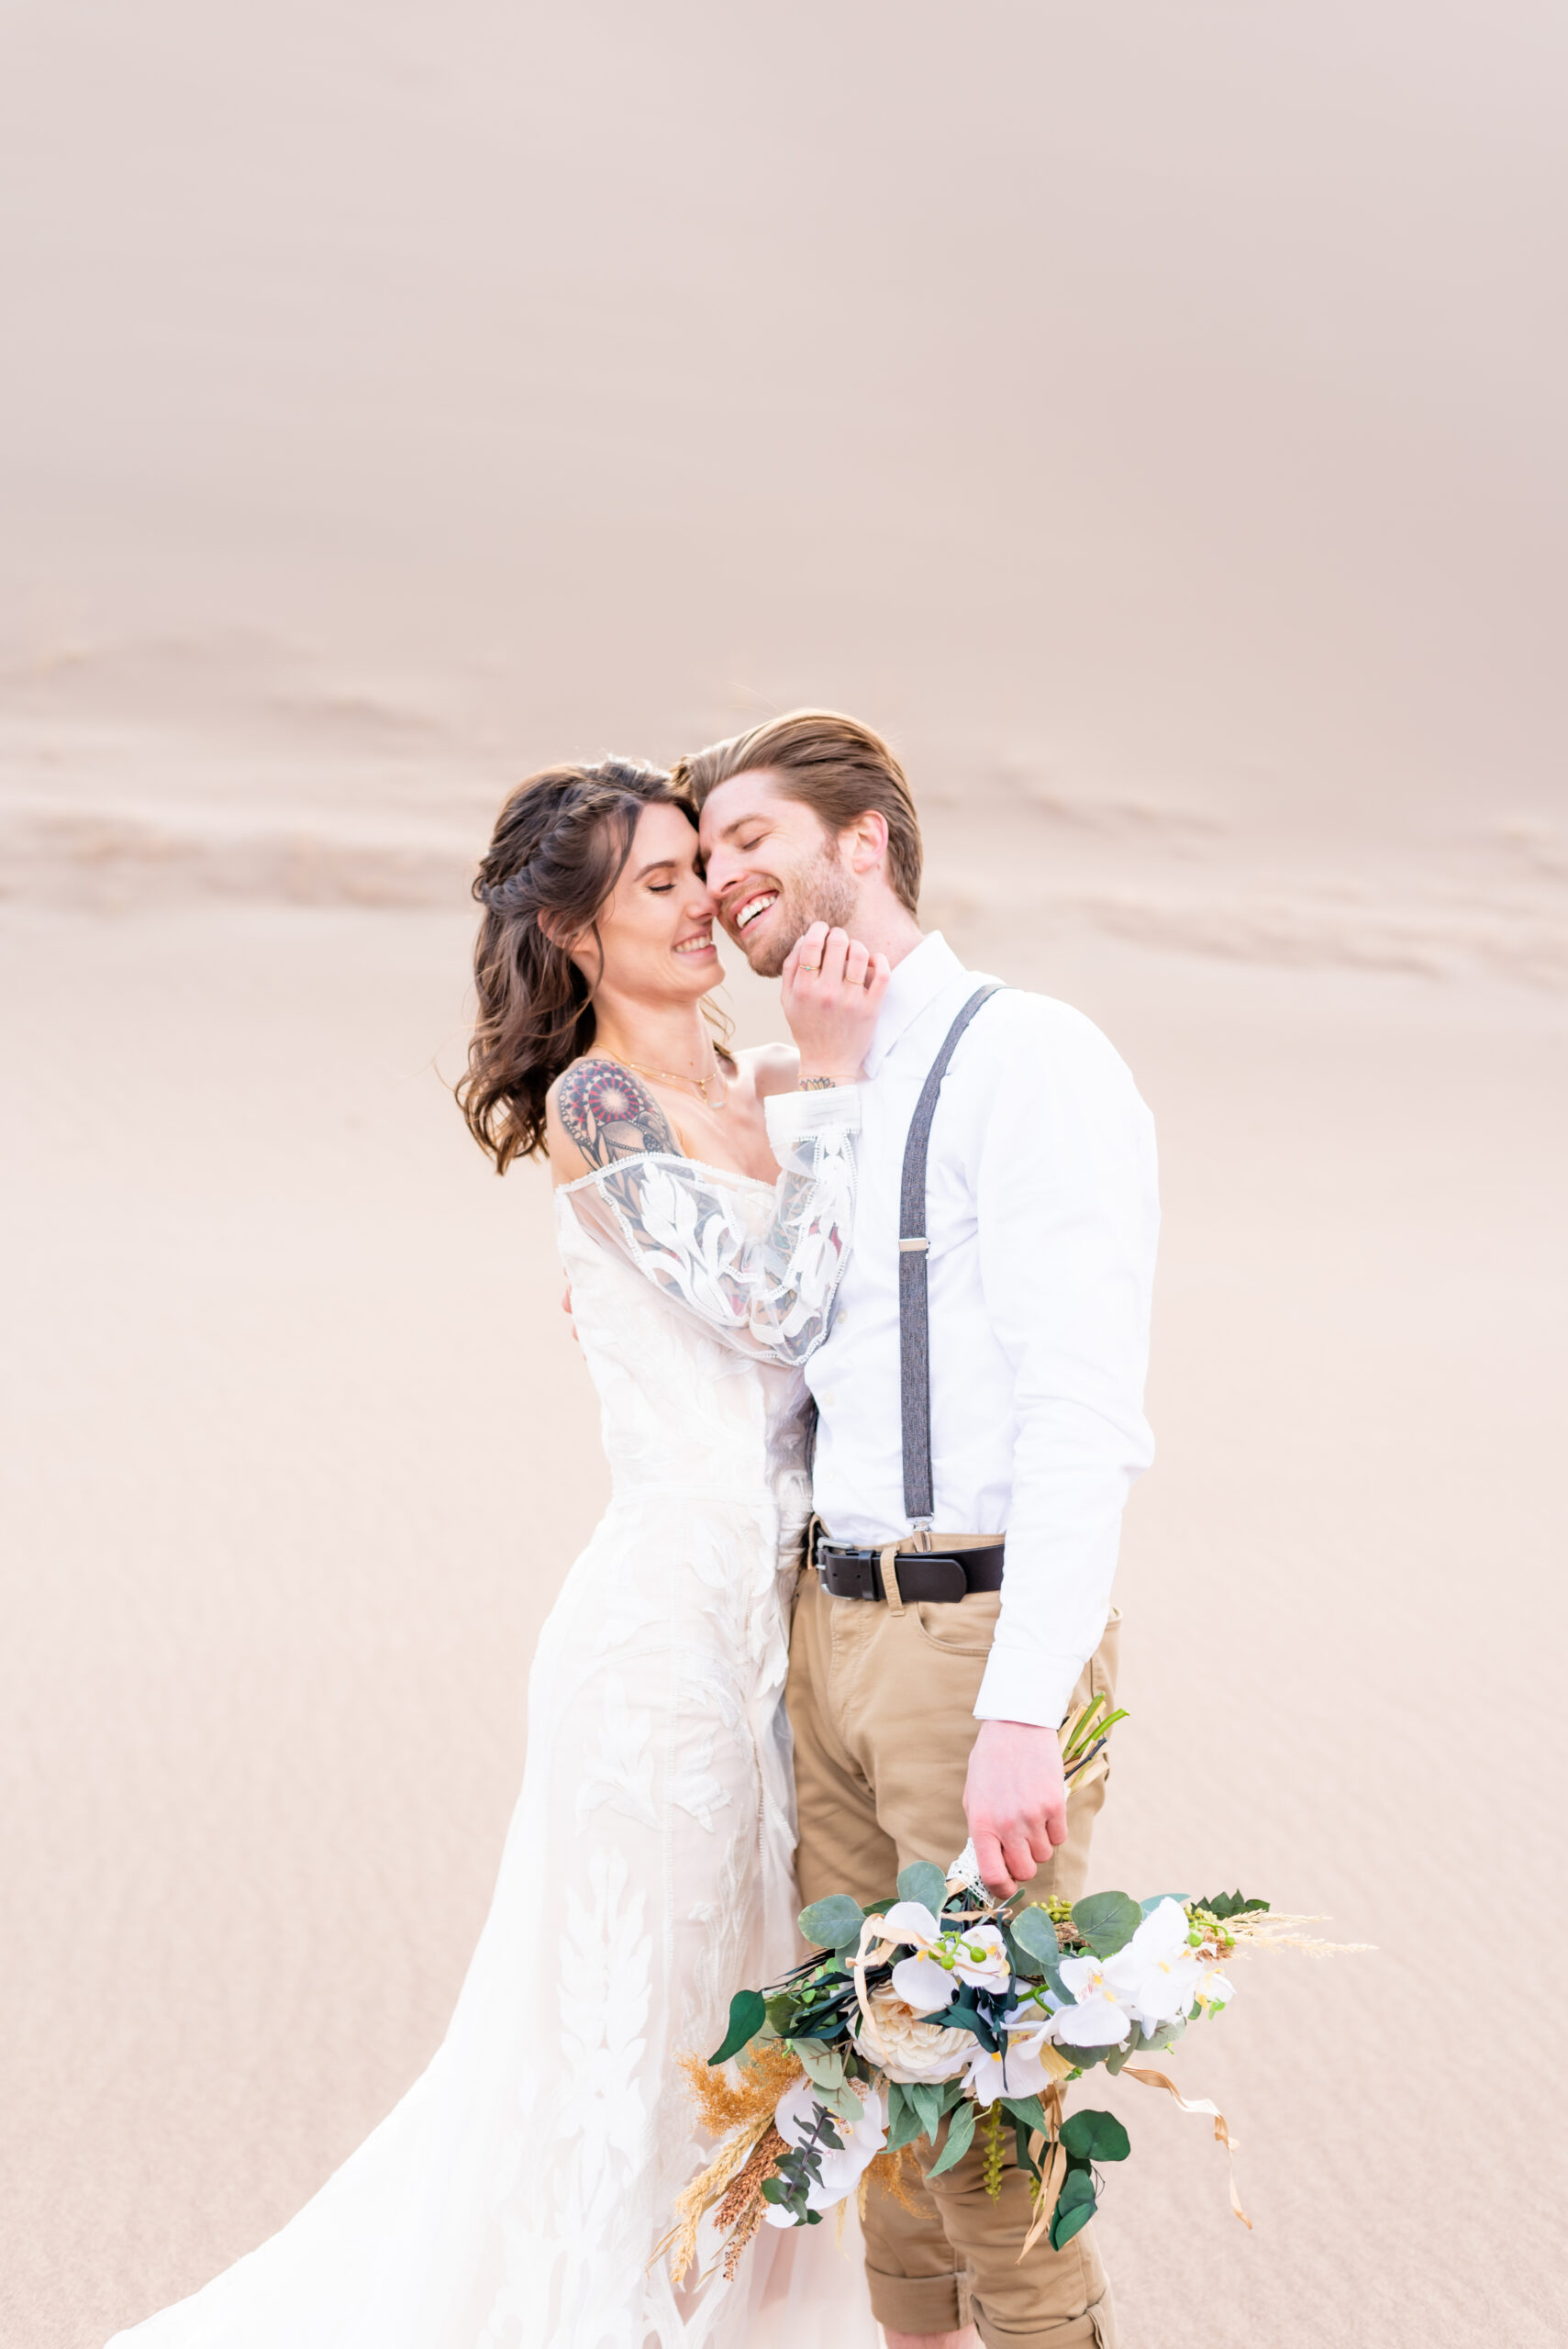 Bride and groom laughing together on their elopement day at great sand dunes